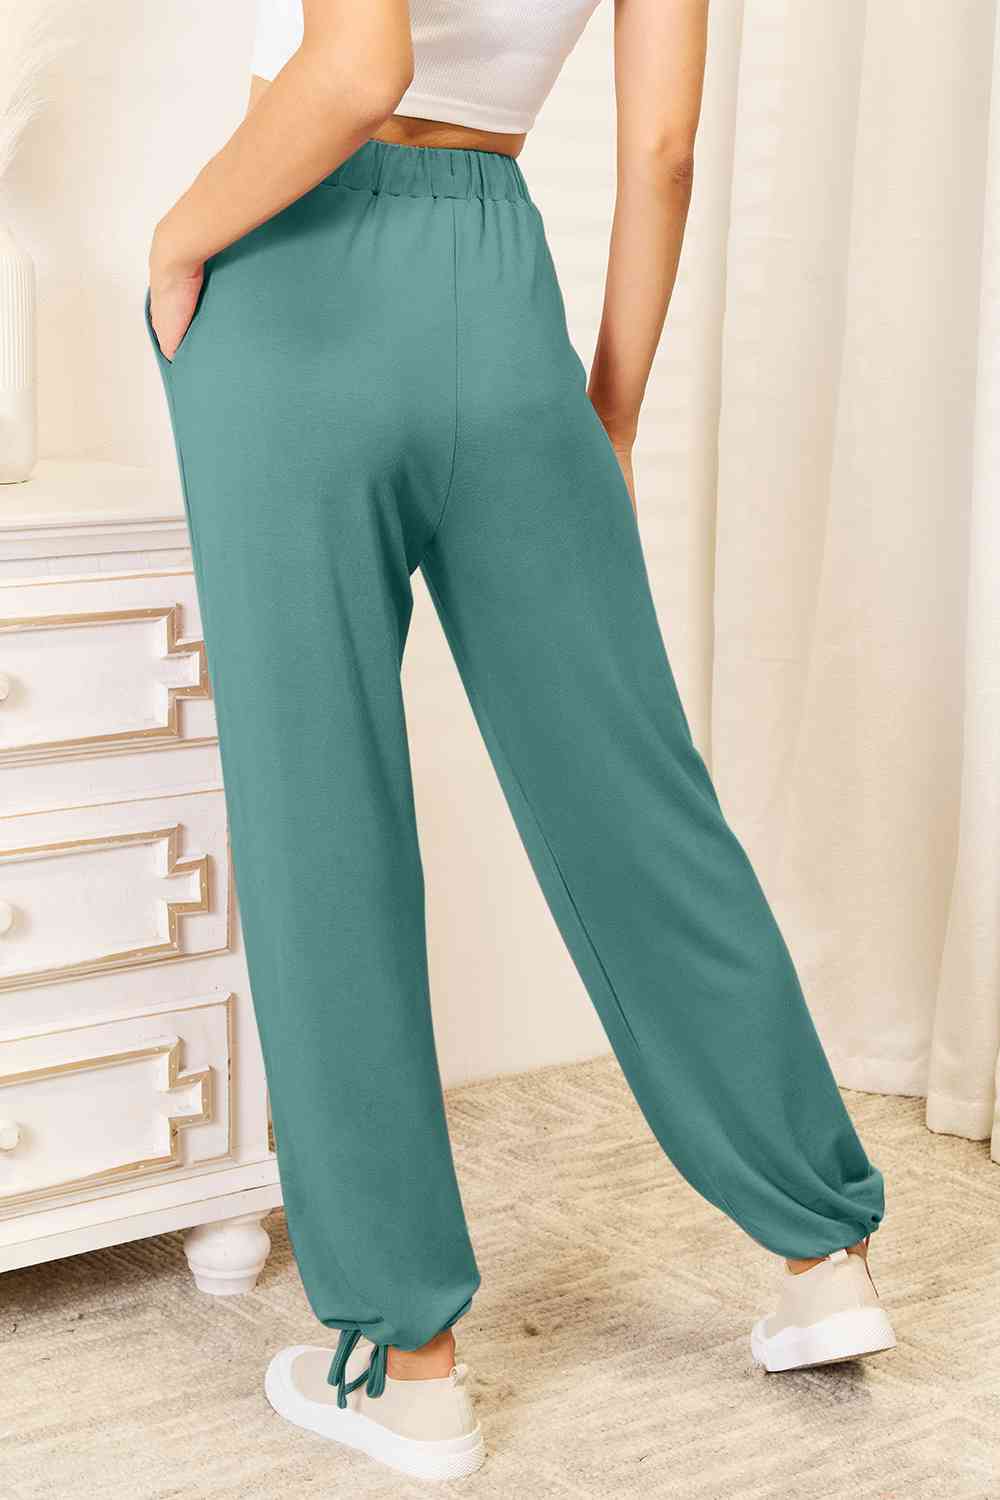 Long Ruffled Crinkle Rayon Pants with a Wide Leg and Elasticised Waist –  WhatNaturalsLove.com